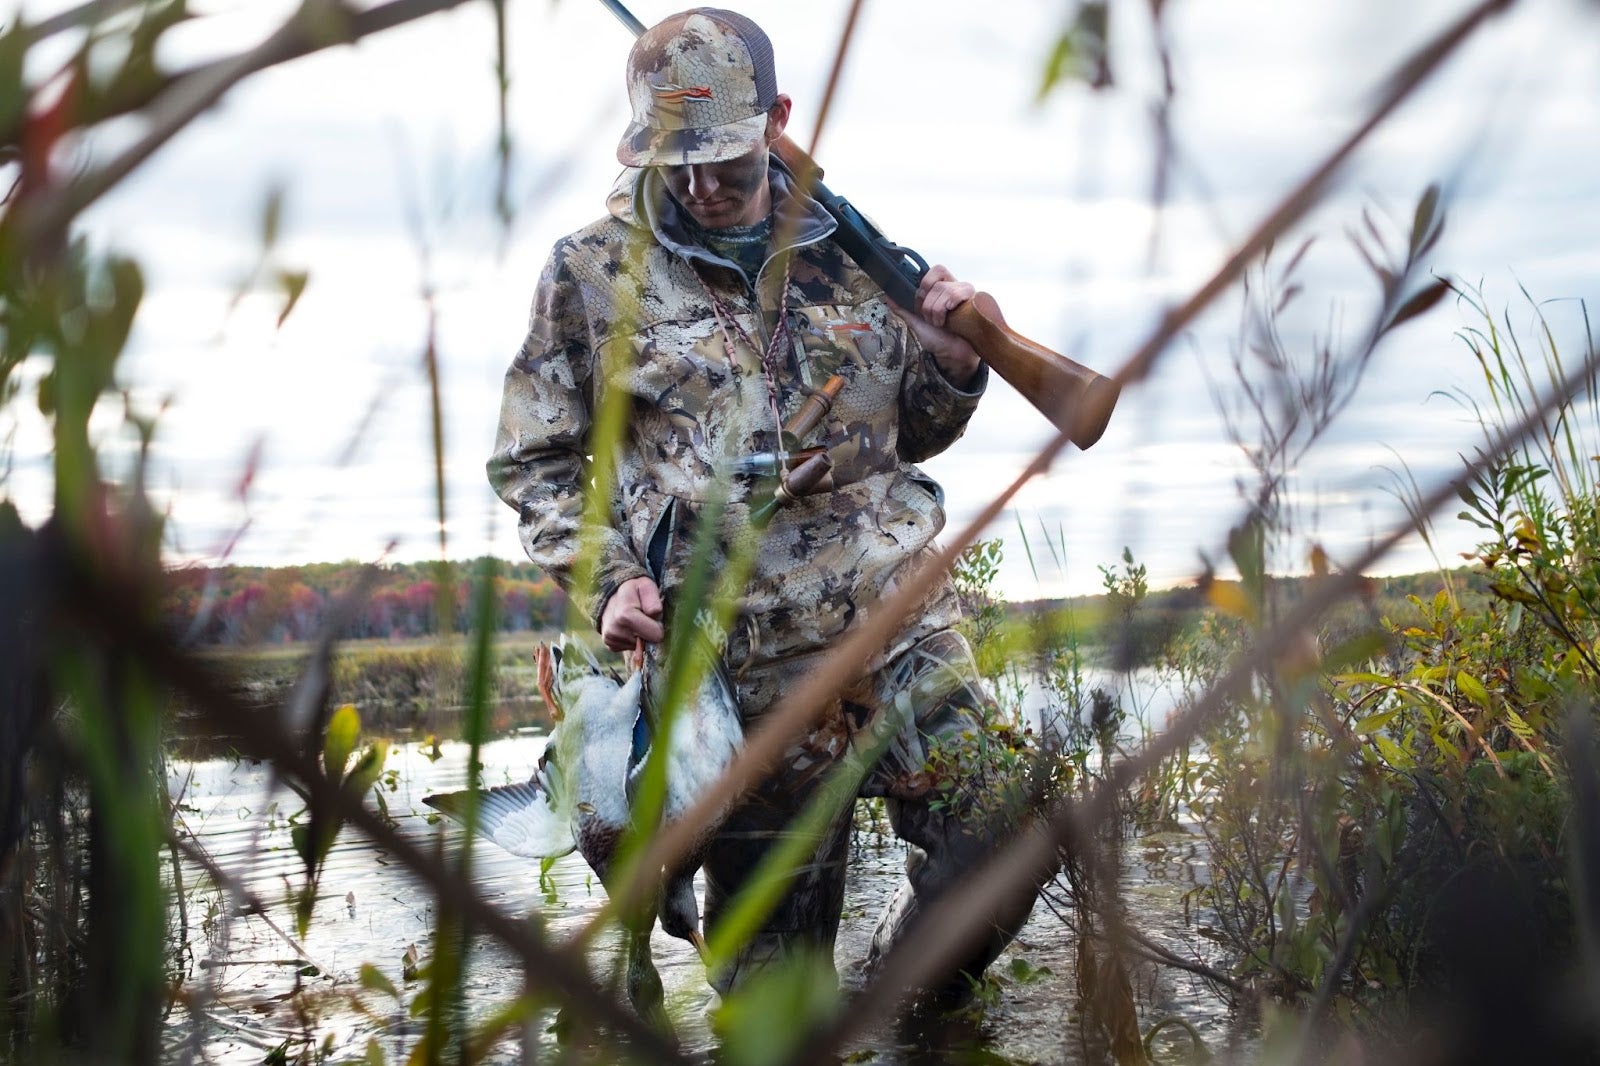 Waterfowl Pants Perfect for Duck Hunting